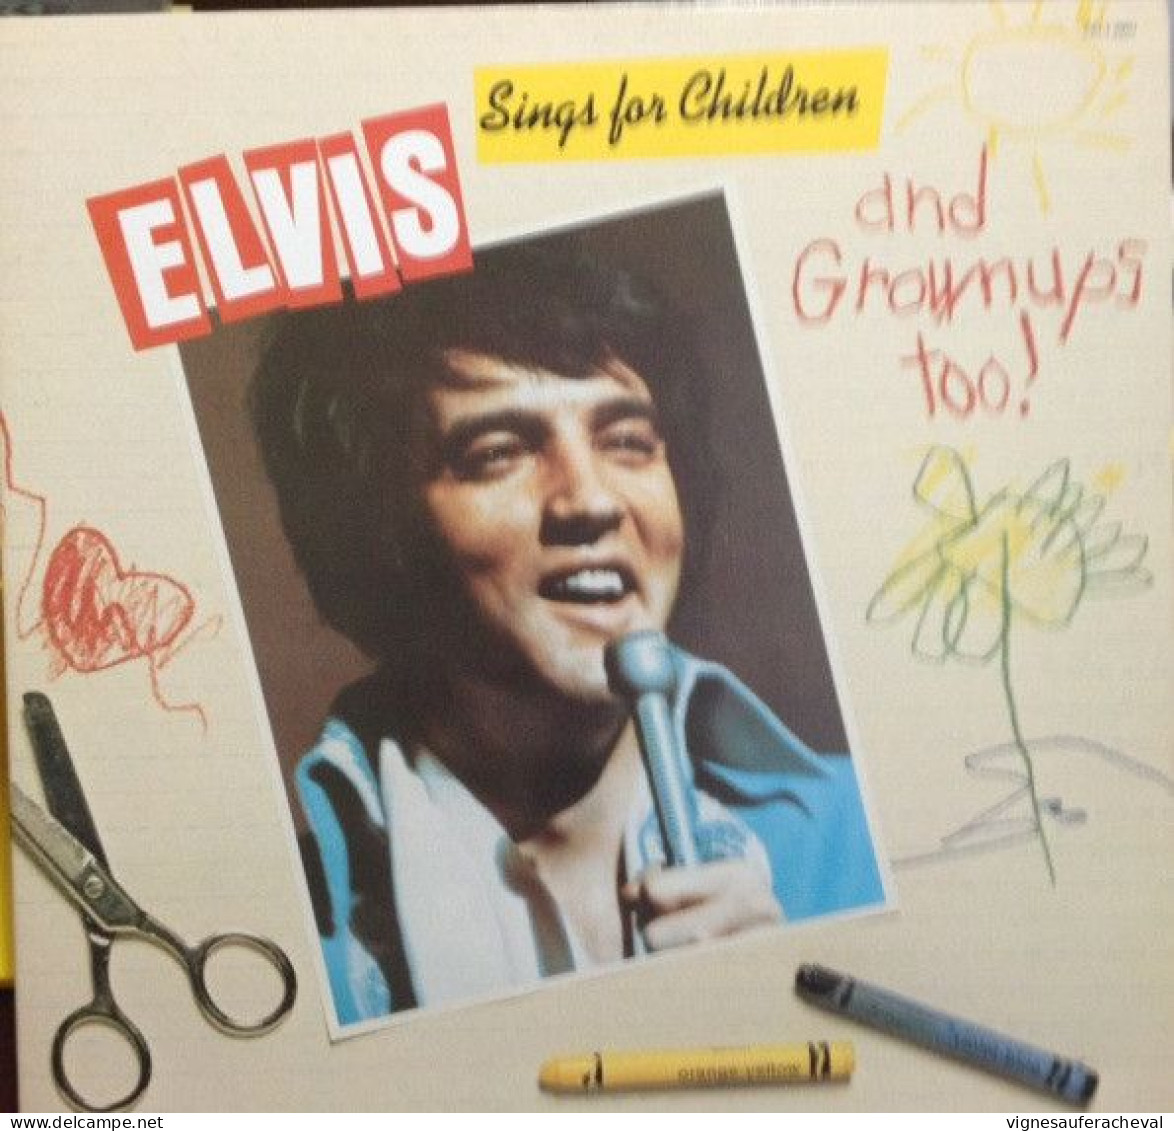 Elvis Presley - Elvis Sings For Children And Grownups Too!! - Autres - Musique Anglaise